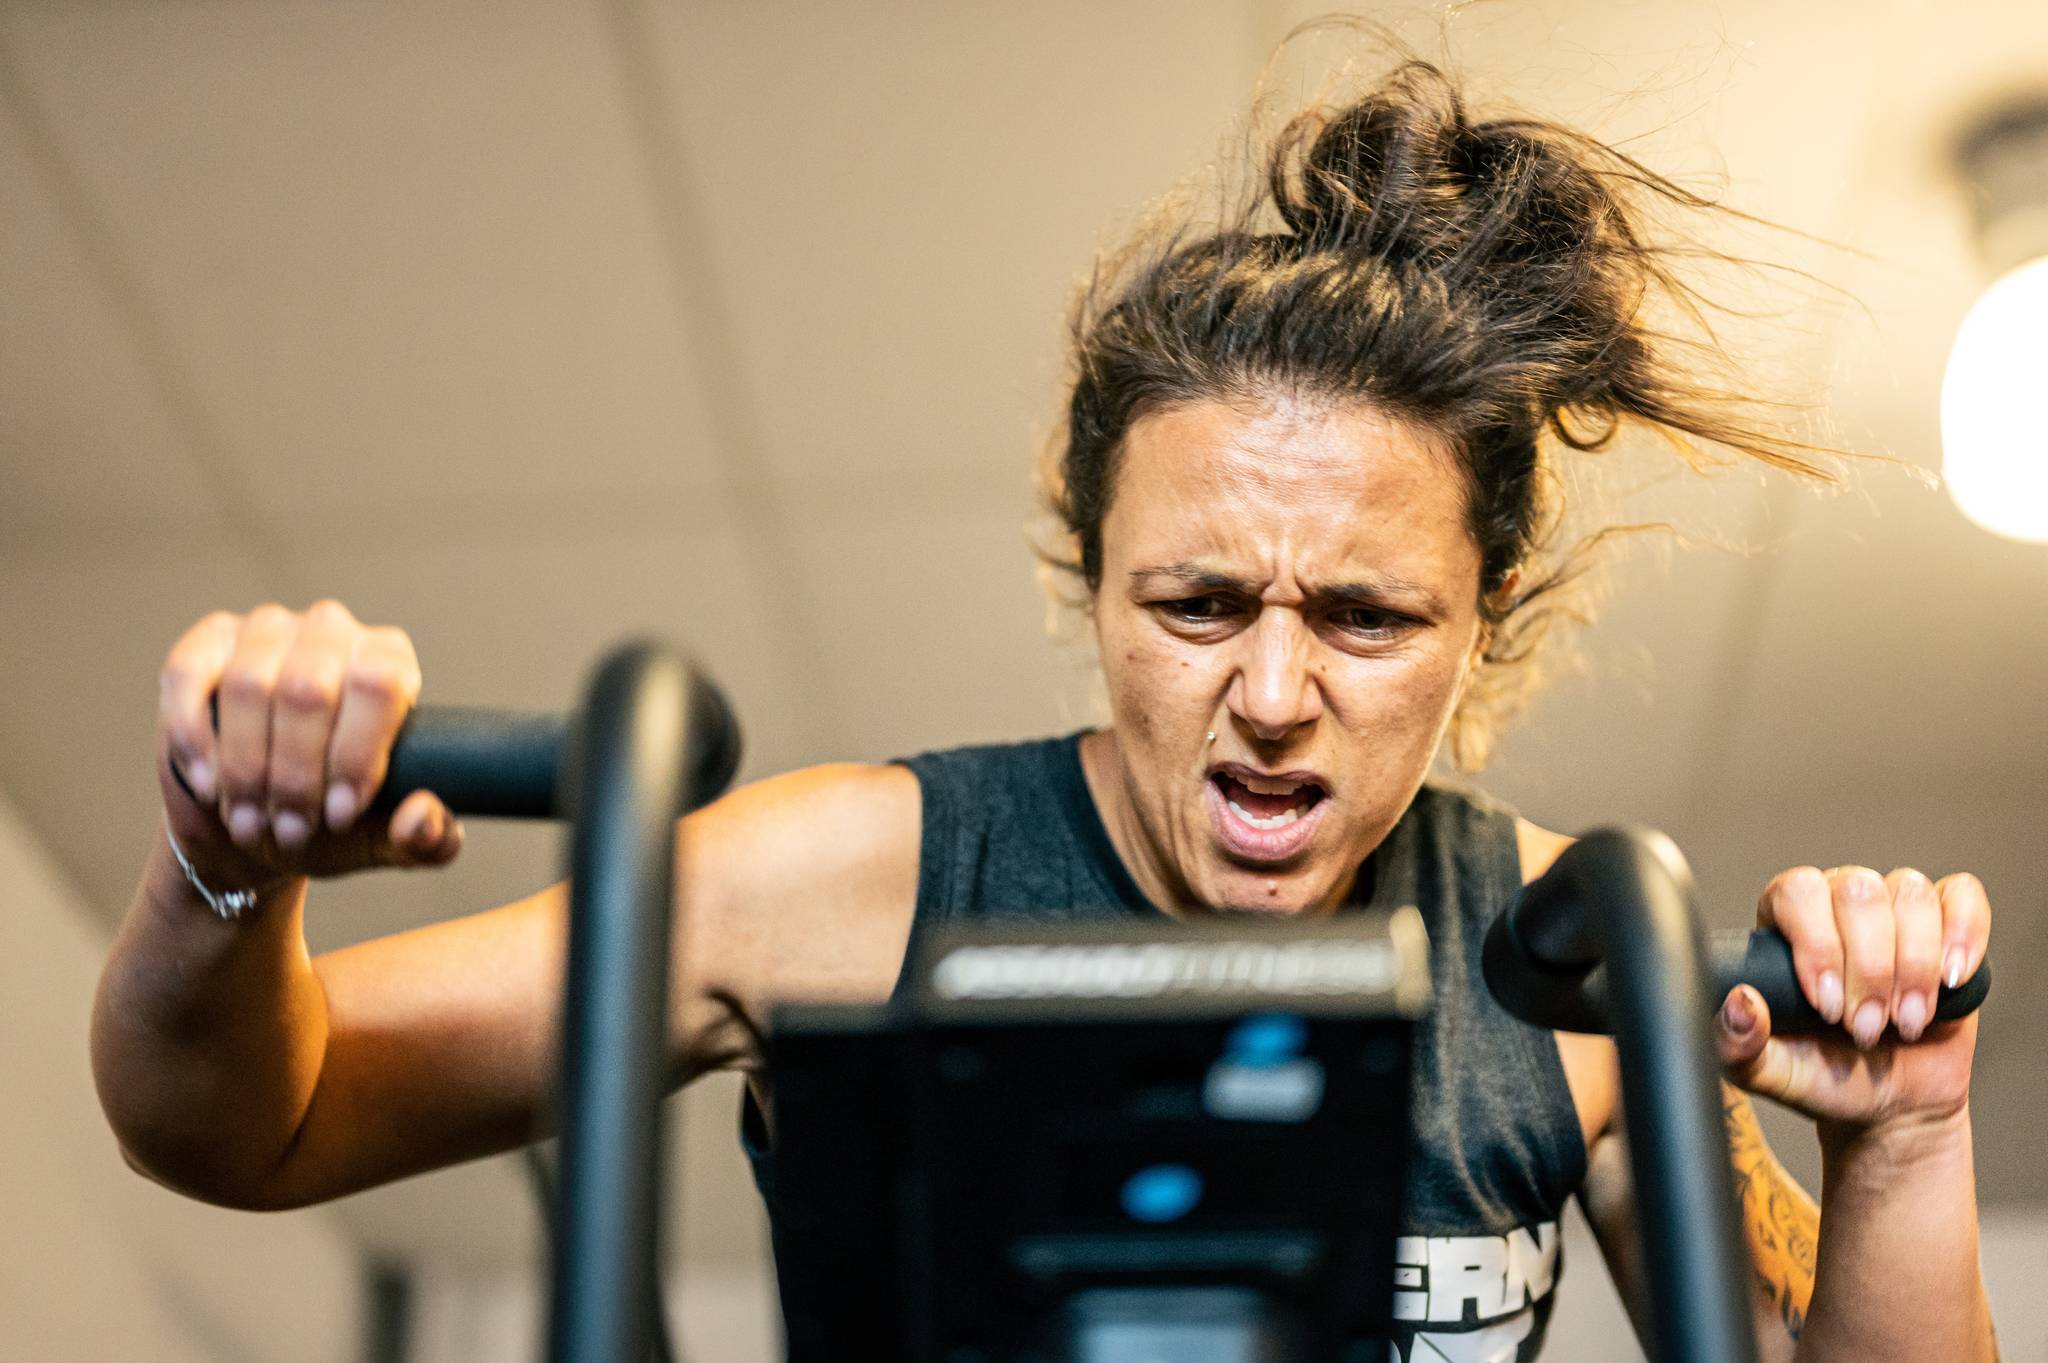 Gym face campaign addresses 'gymtimidation'